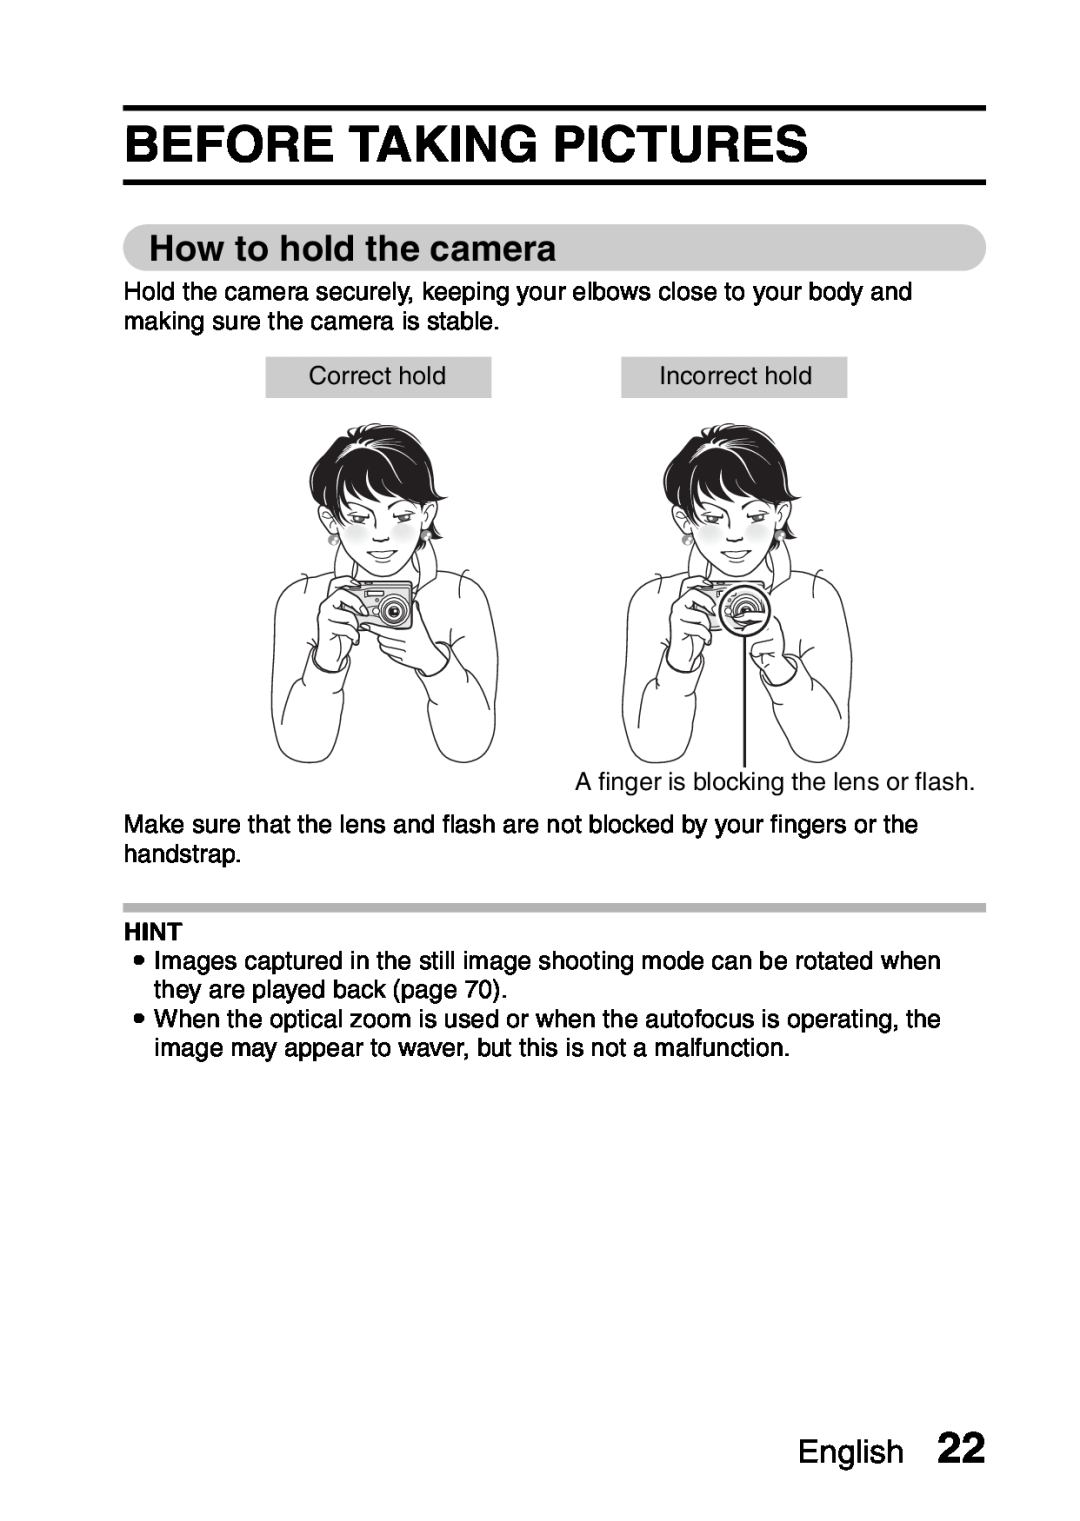 Sanyo VPC-S60 instruction manual Before Taking Pictures, How to hold the camera, English, Hint 